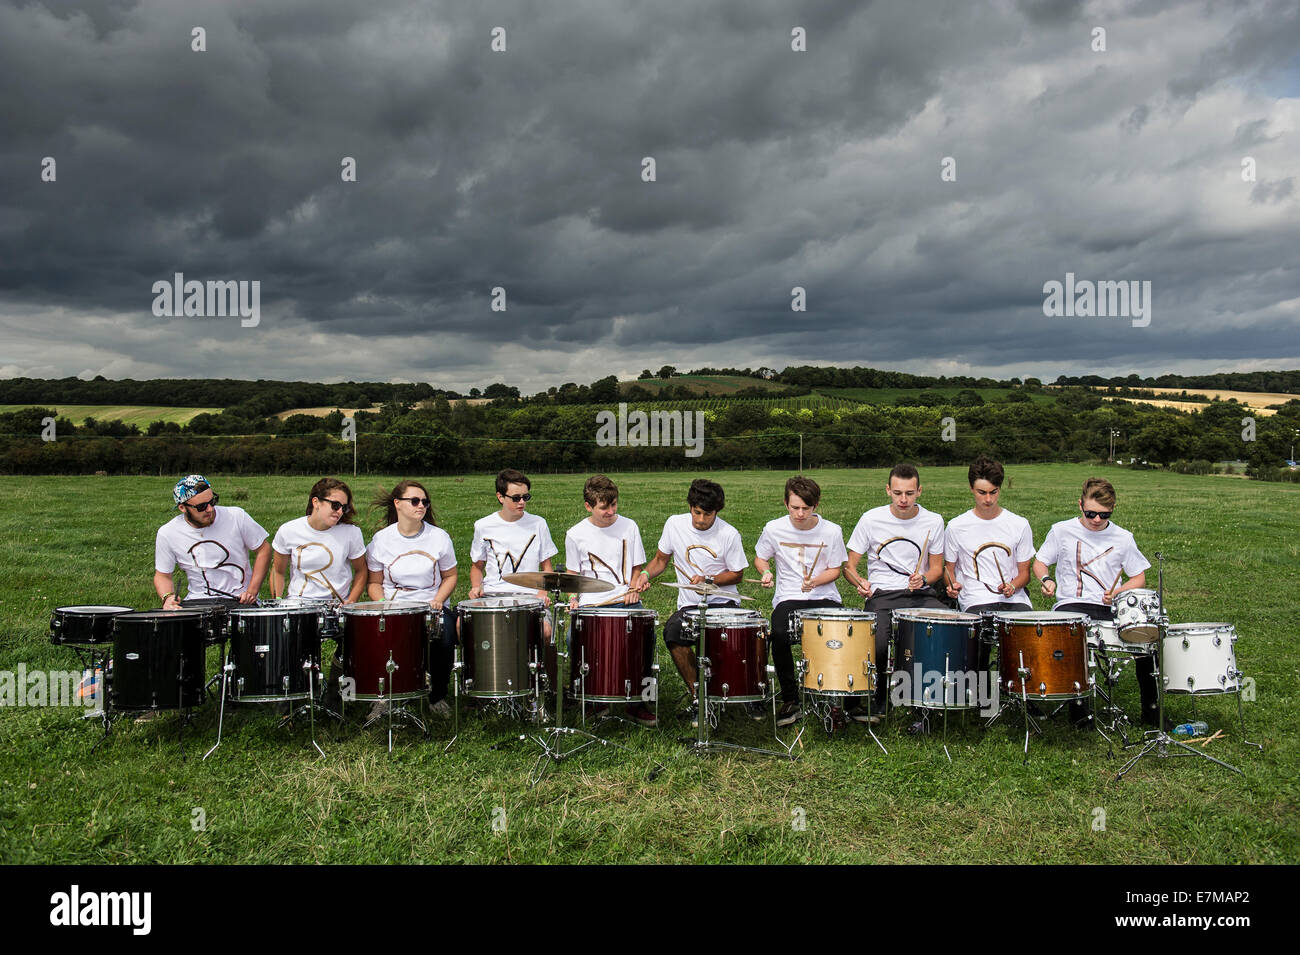 The Legion of Doom drumming ensemble welcomes festivalgoers to the Brownstock Festival in Essex. Stock Photo